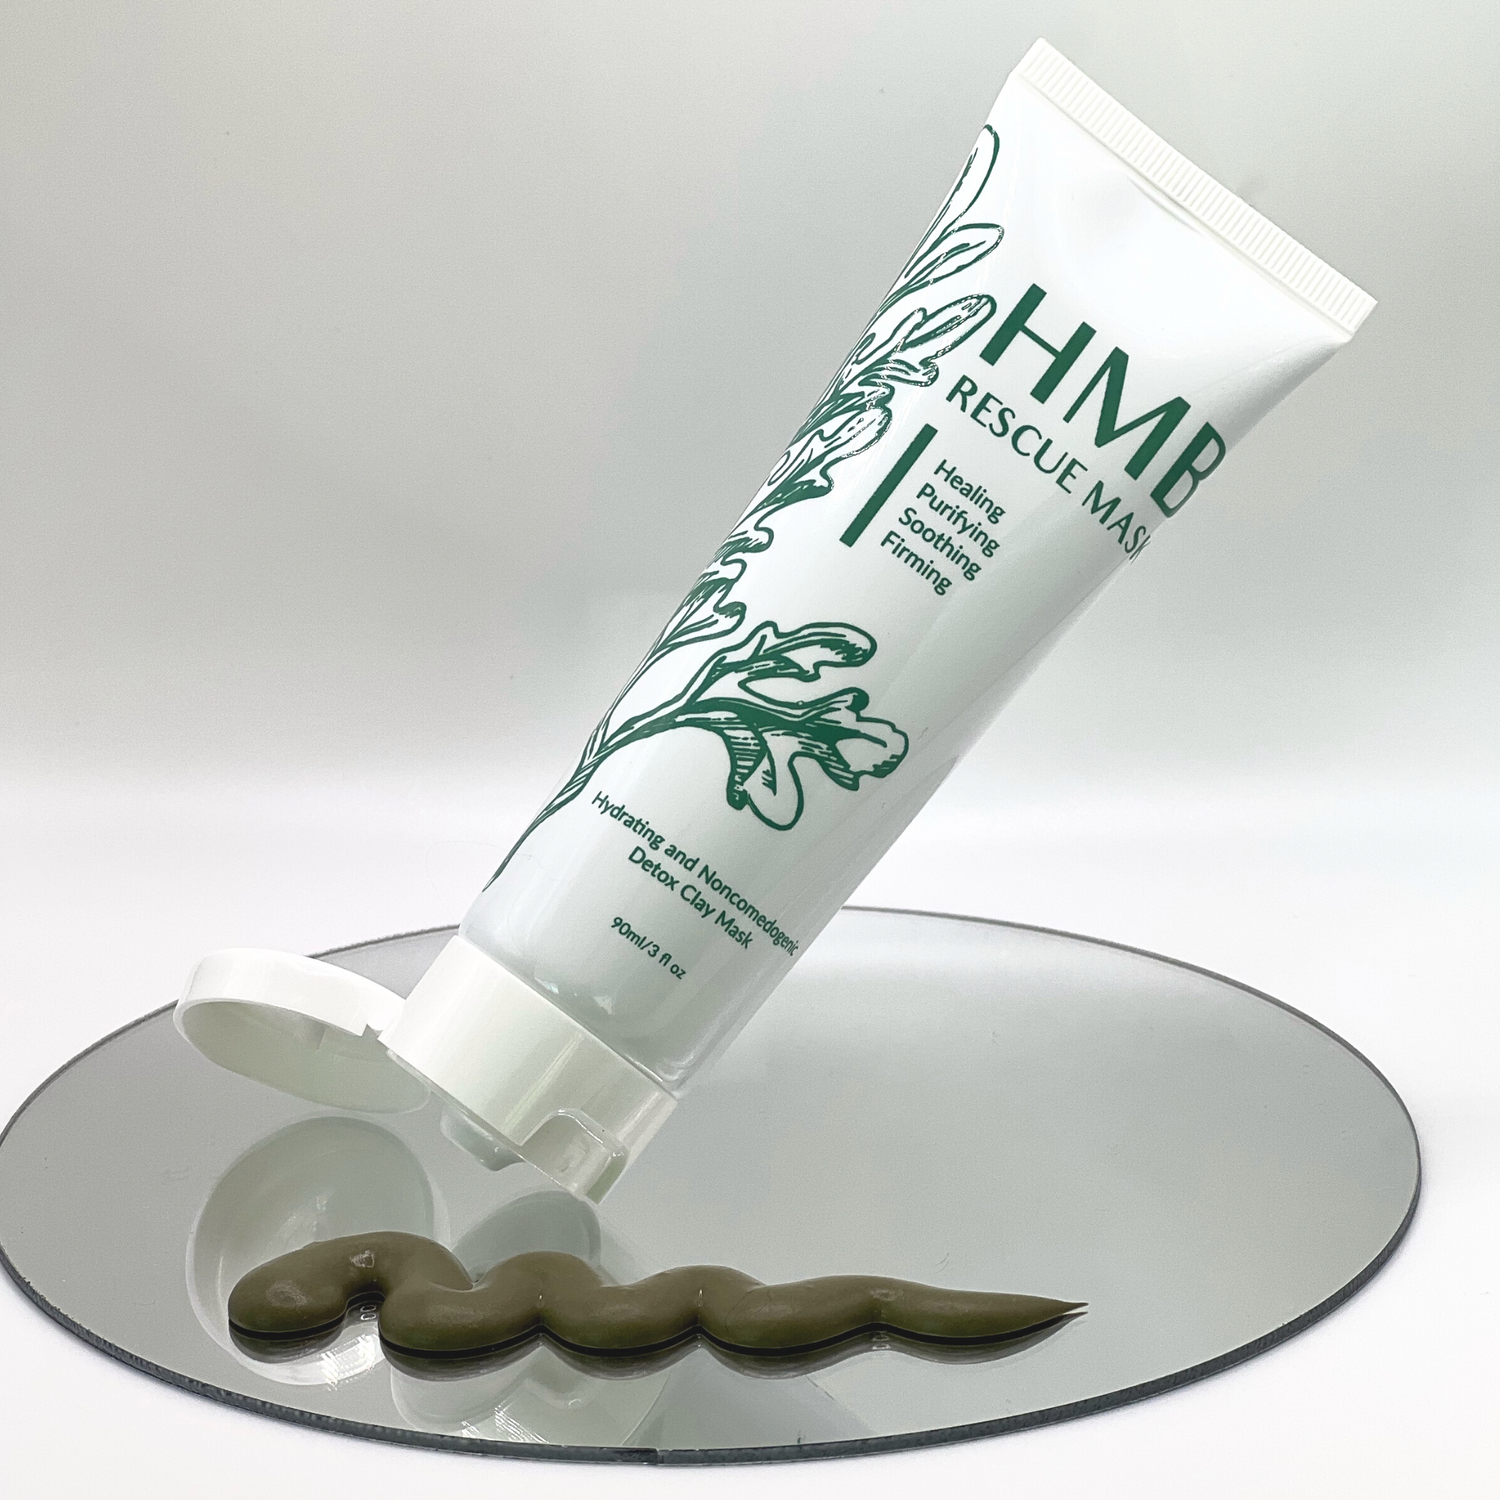 hmb rescue clay mask for face